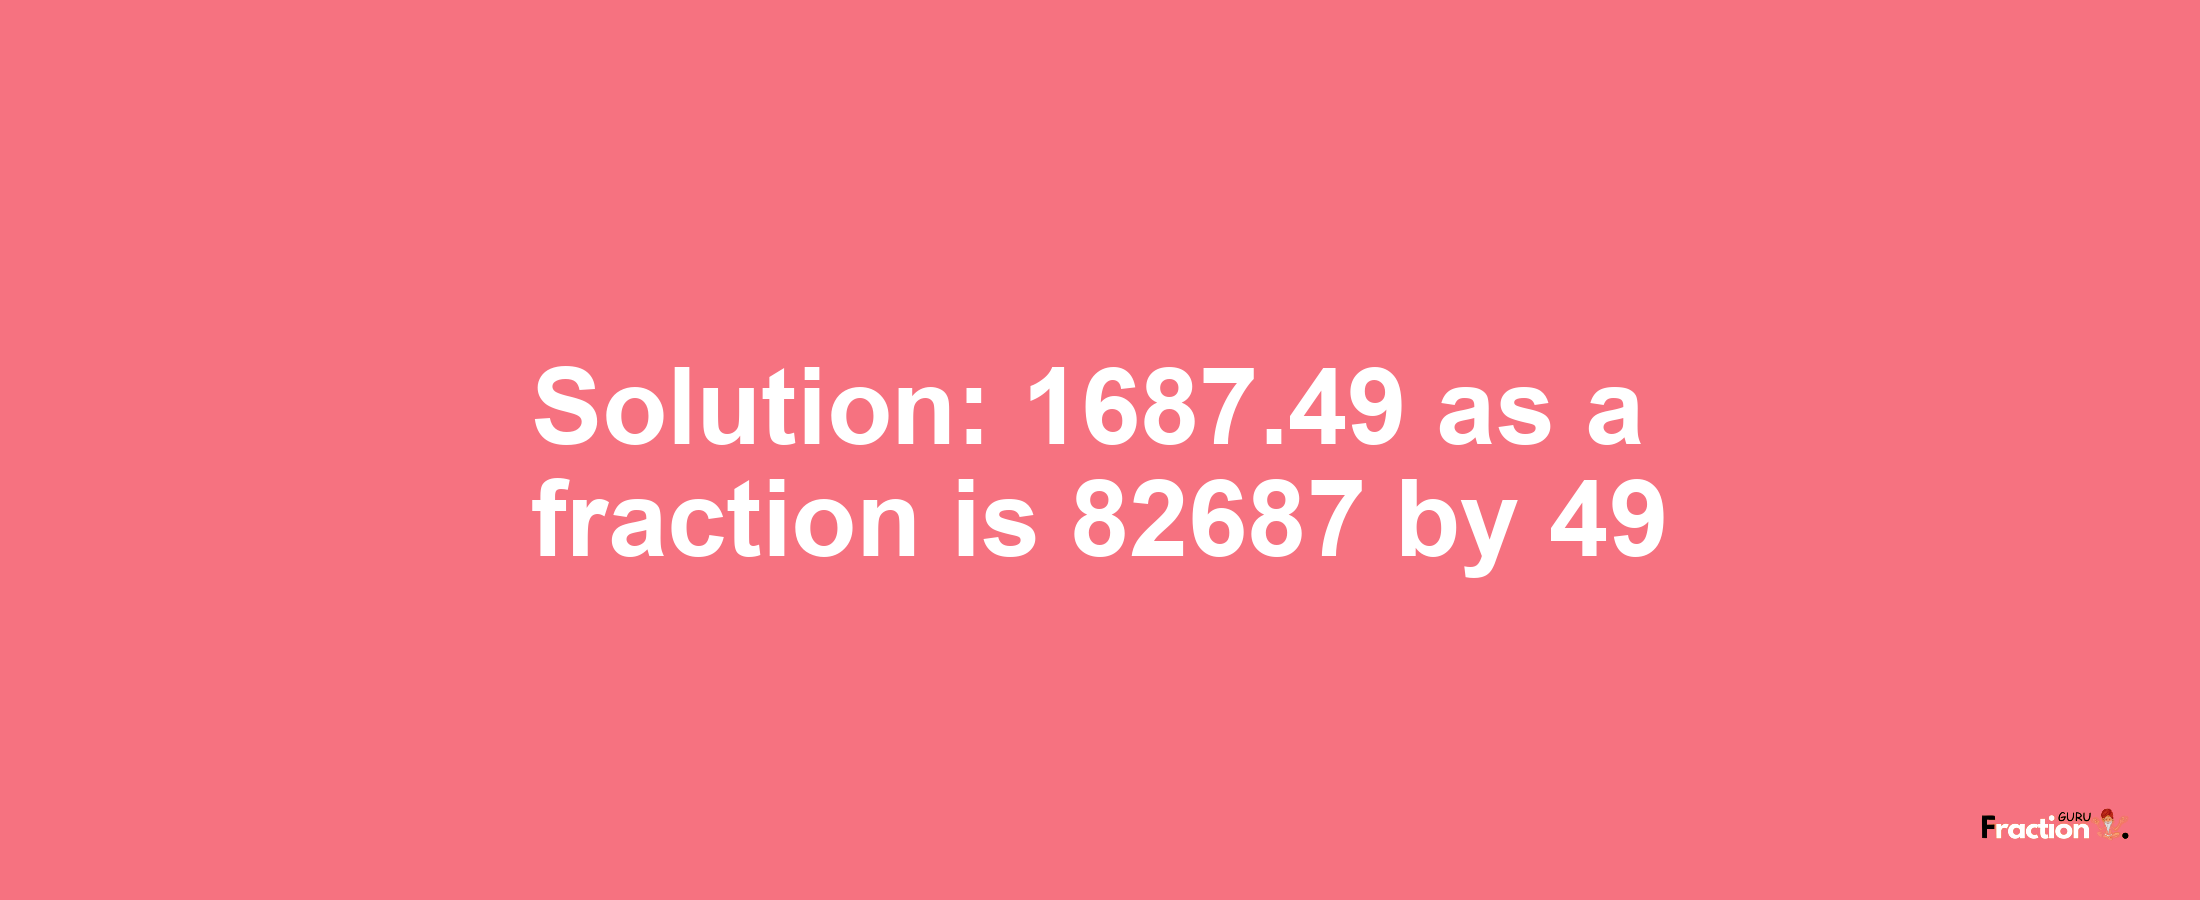 Solution:1687.49 as a fraction is 82687/49